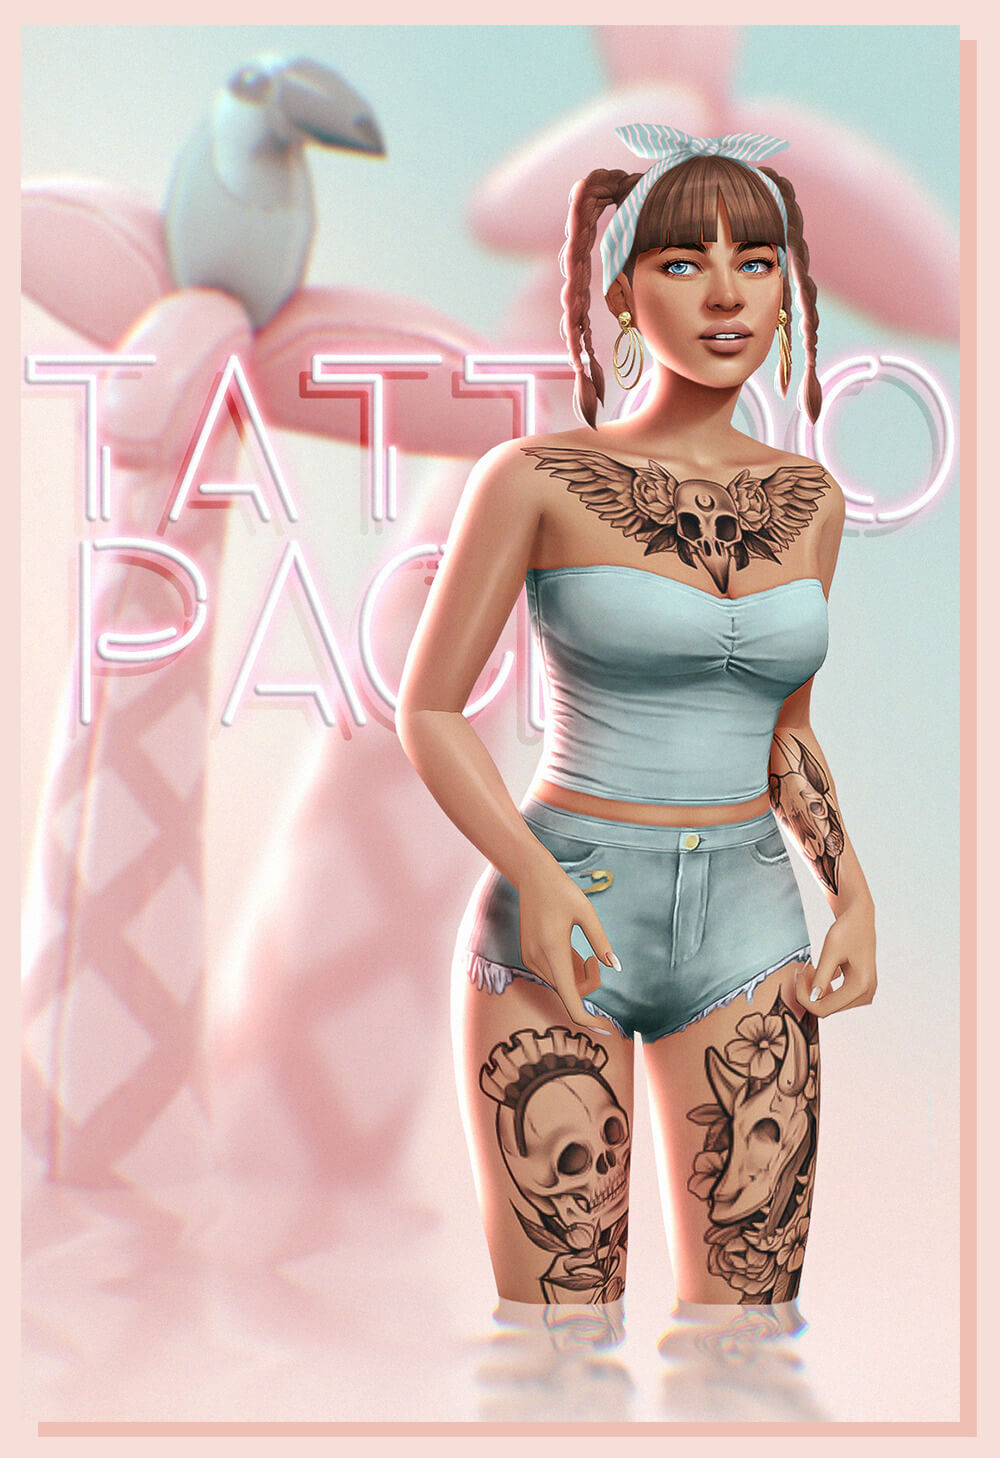 the sims 4 body mods sliders